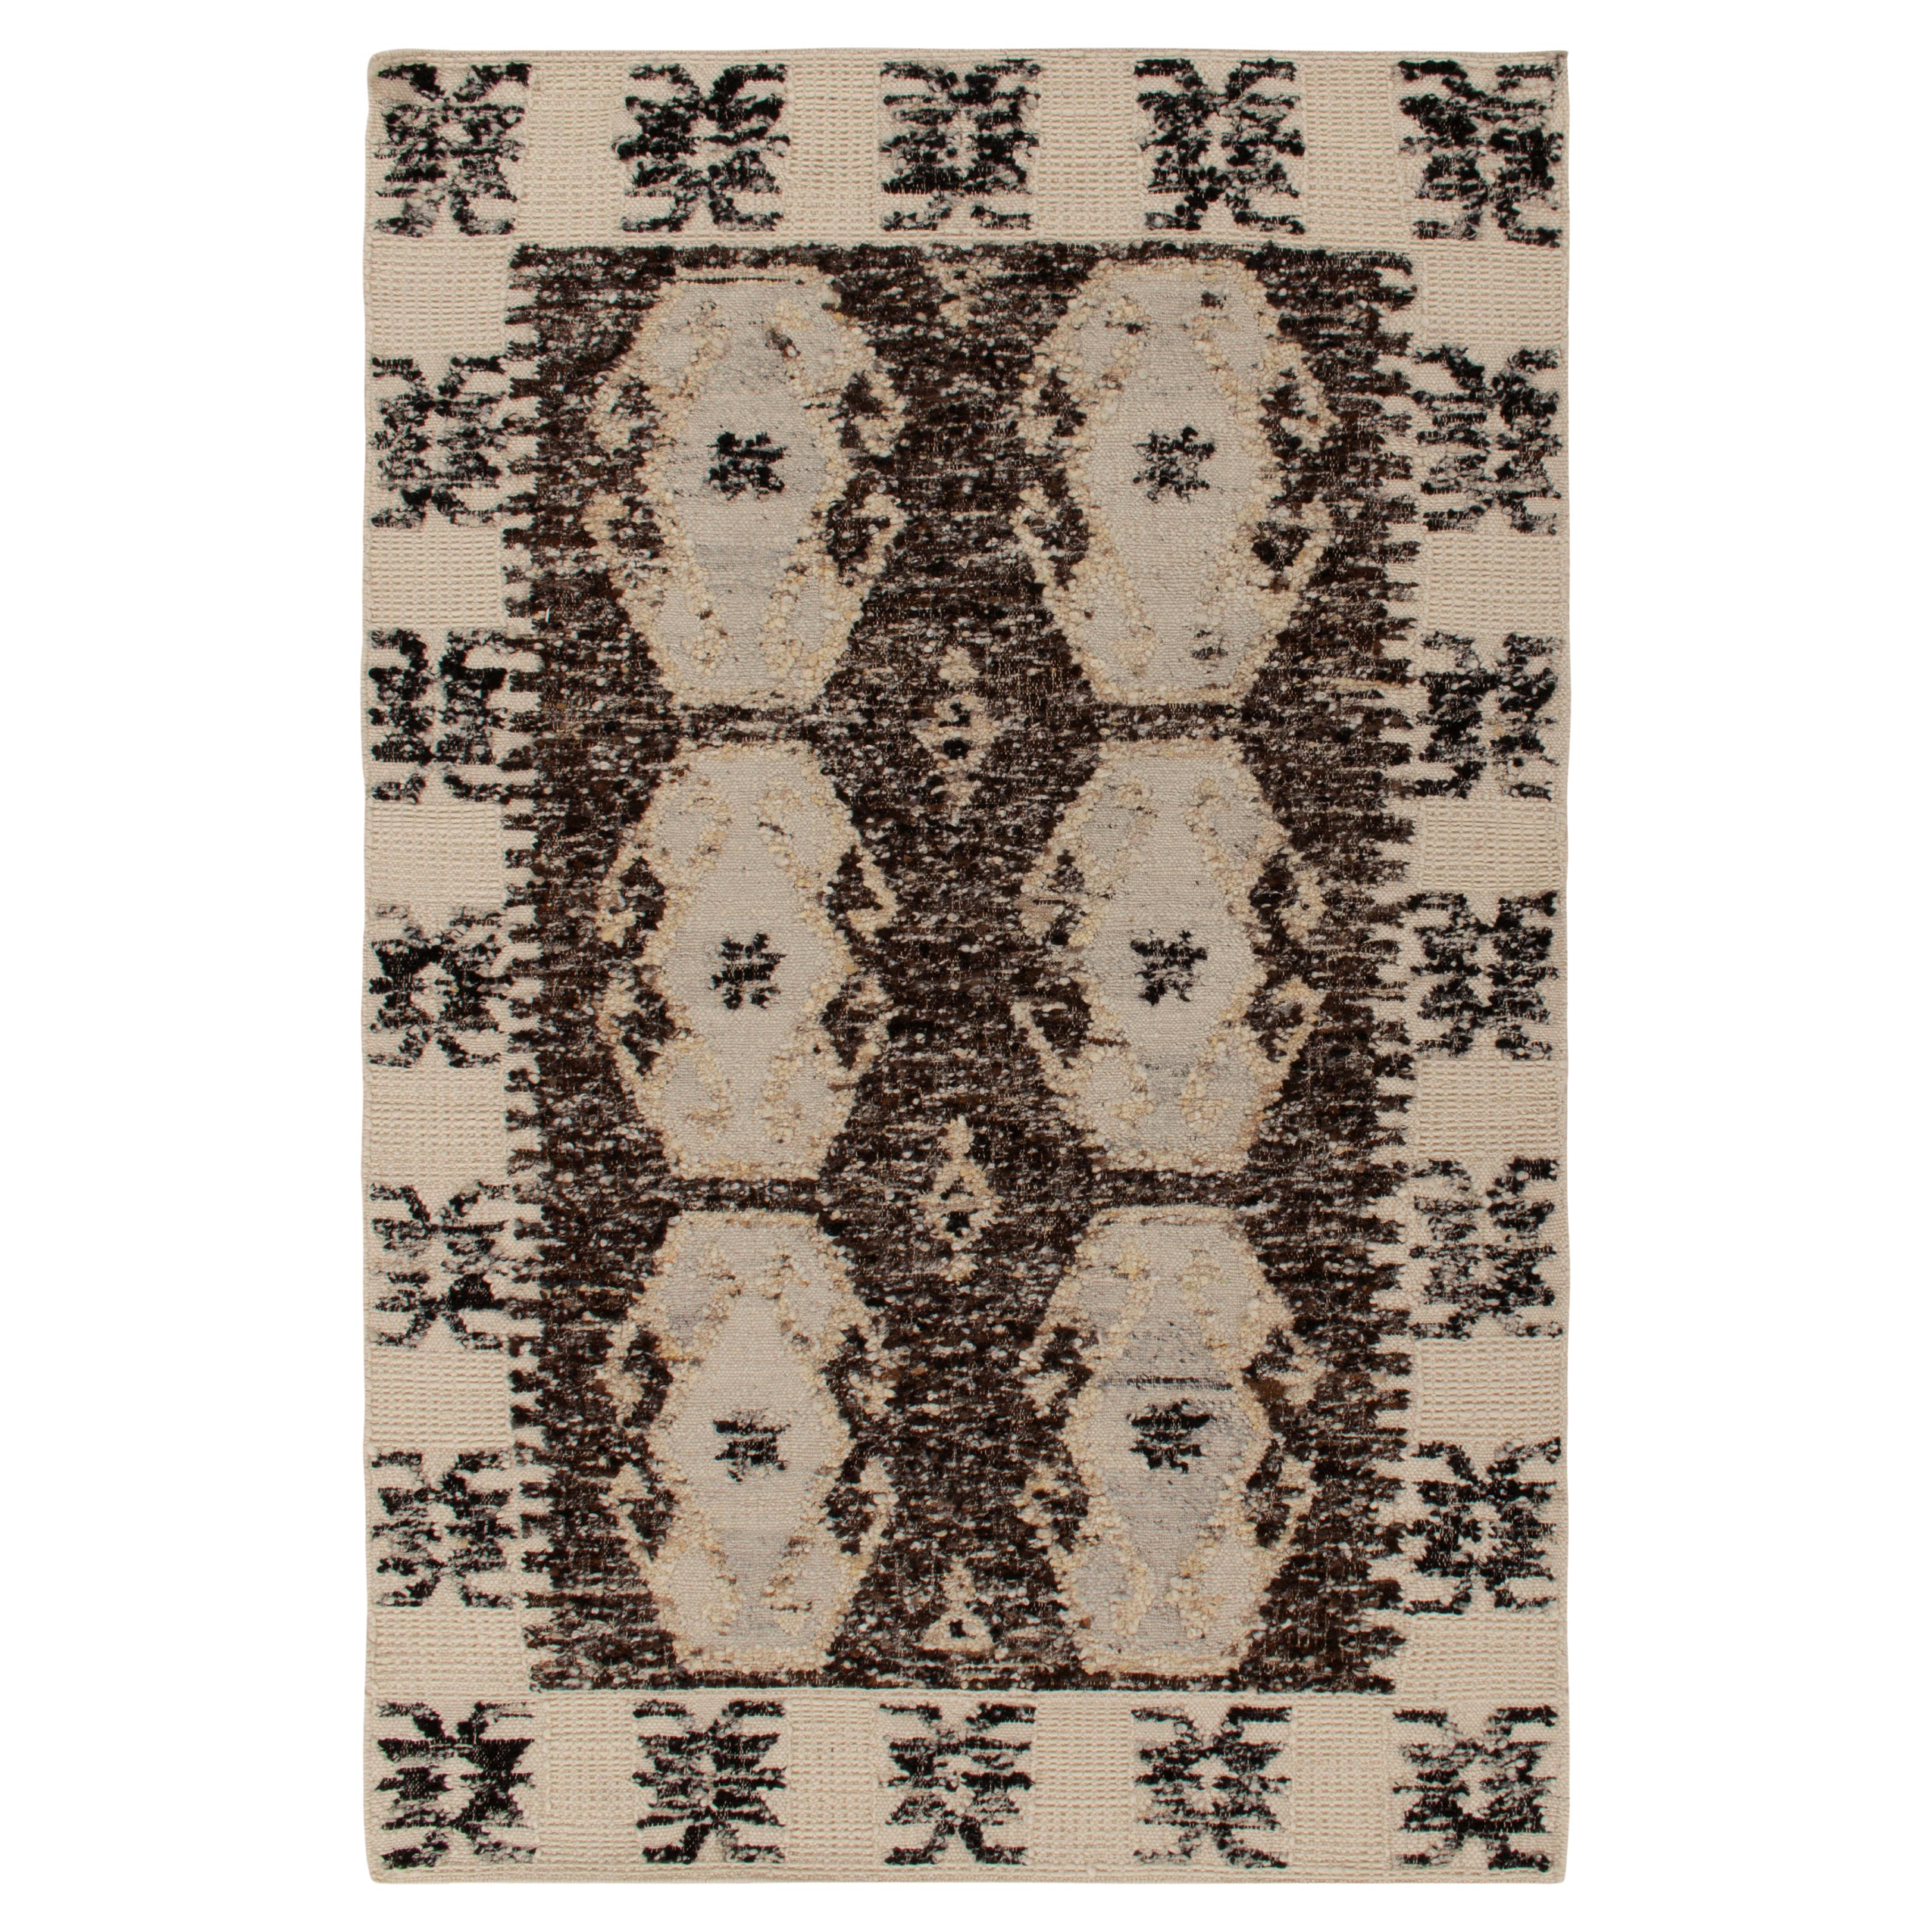 Rug & Kilim's Textural Contemporary Kilim Rug in Beige-Brown, White and Black  For Sale